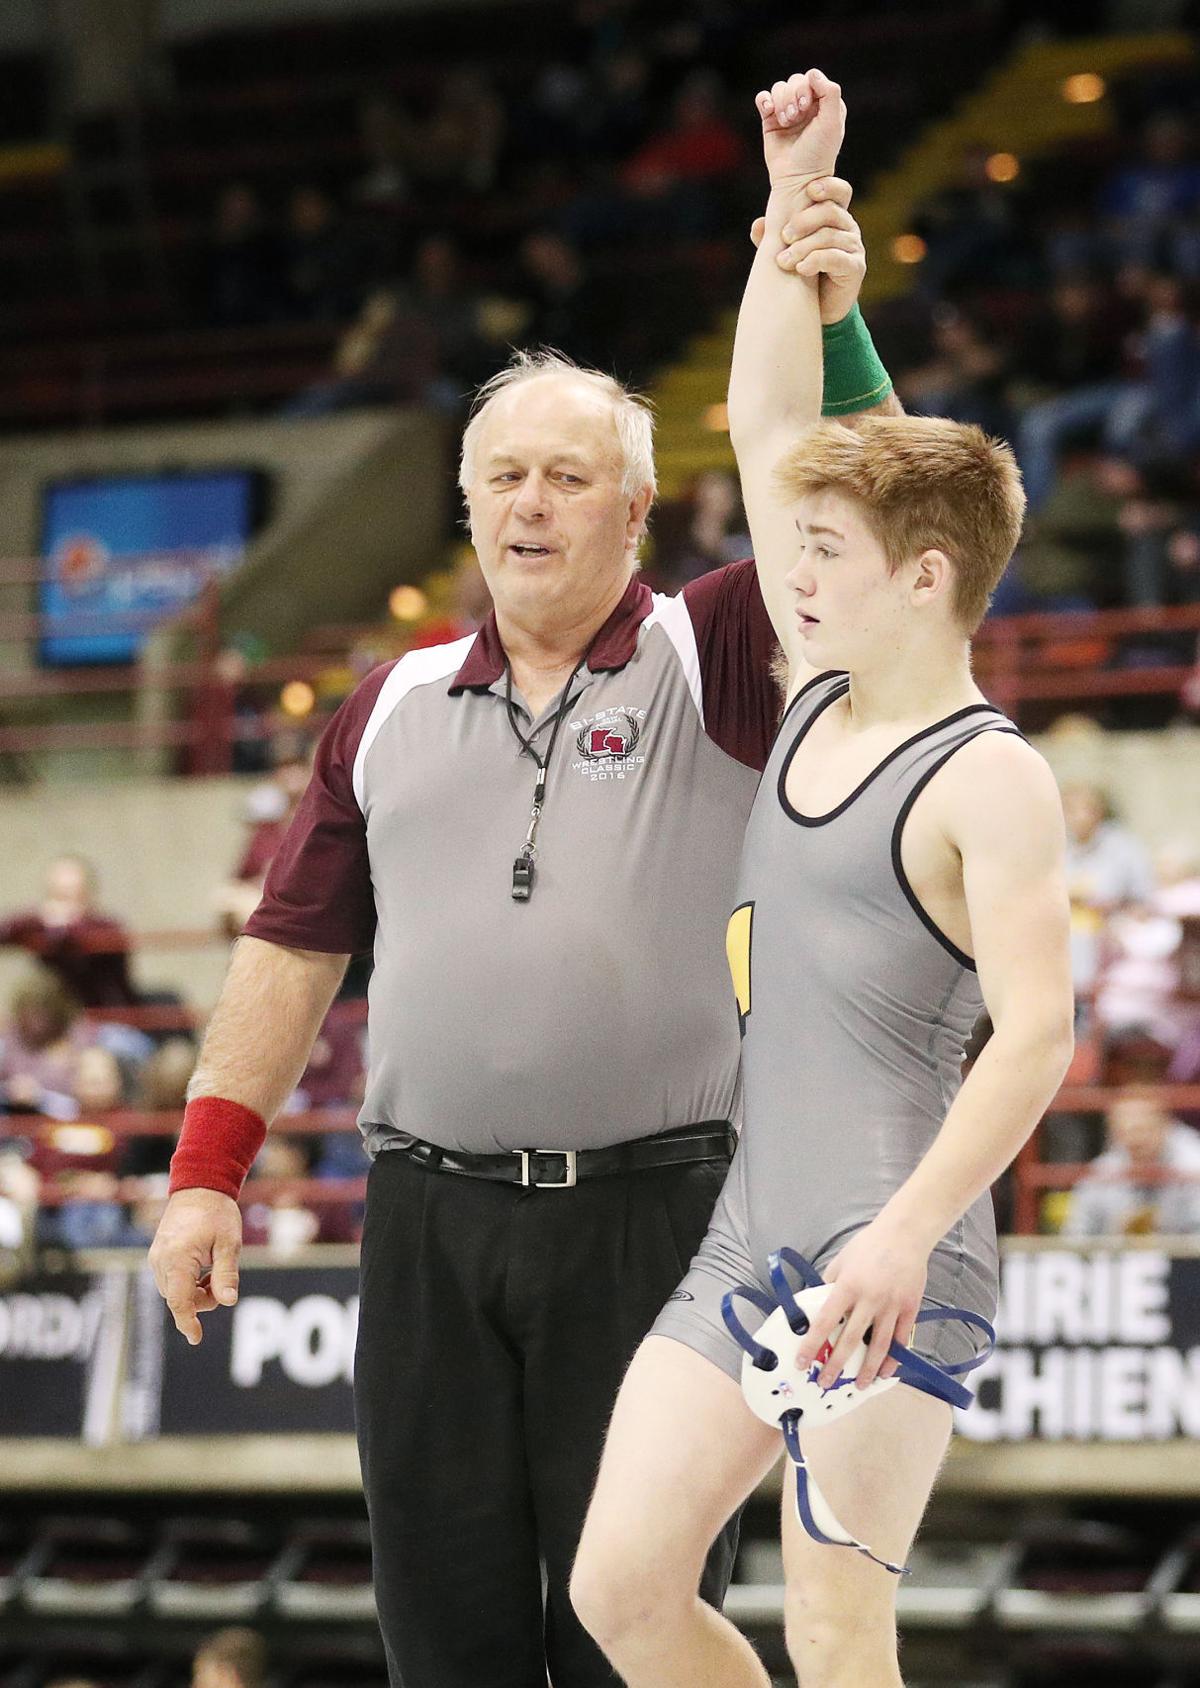 BiState Classic Roundup of top local finishers and championship